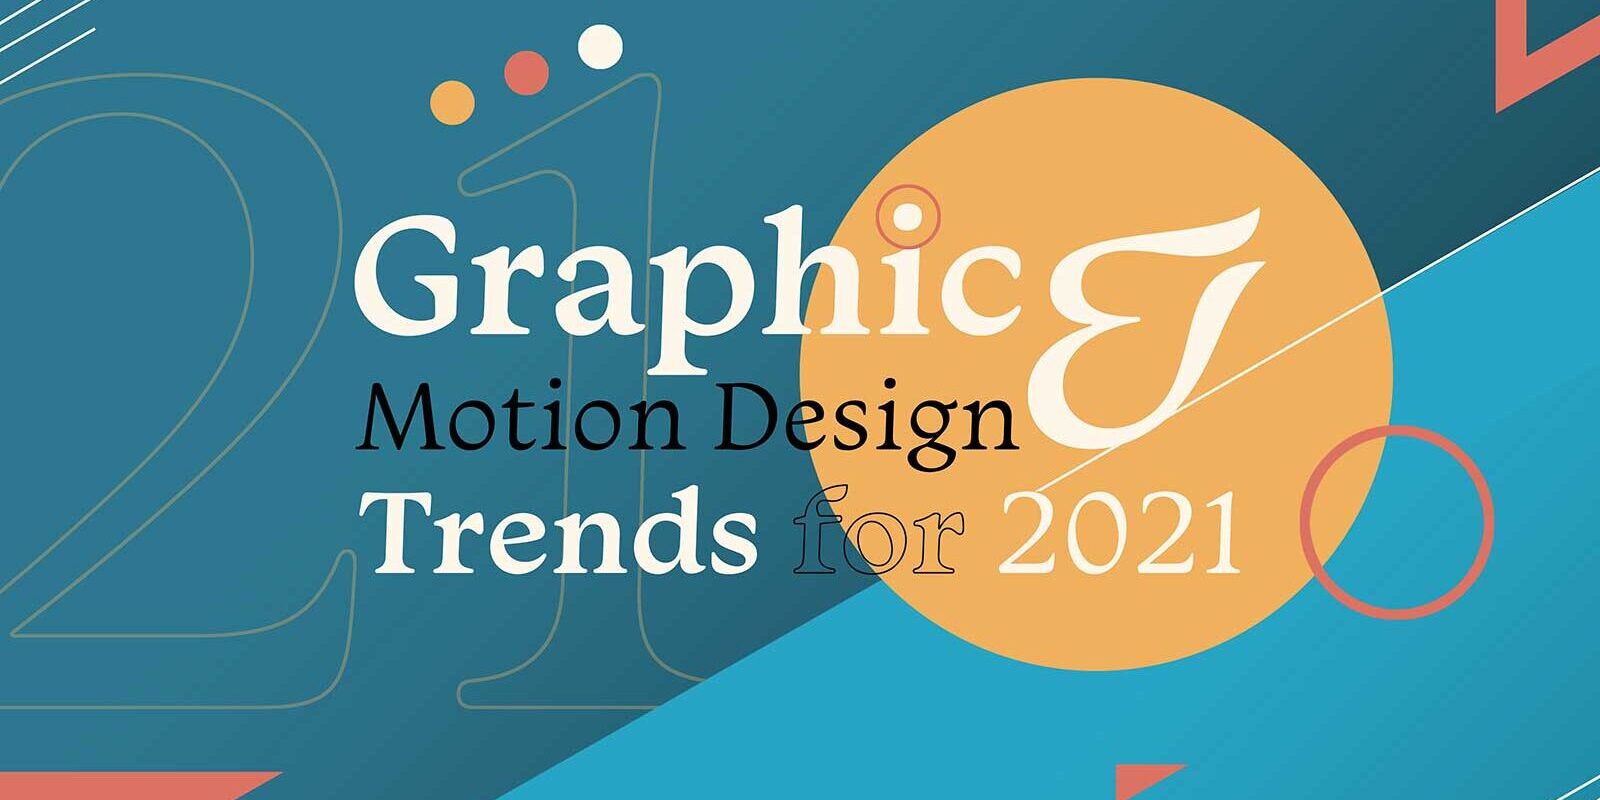 Top 6 Graphic and Motion Design Trends for 2021